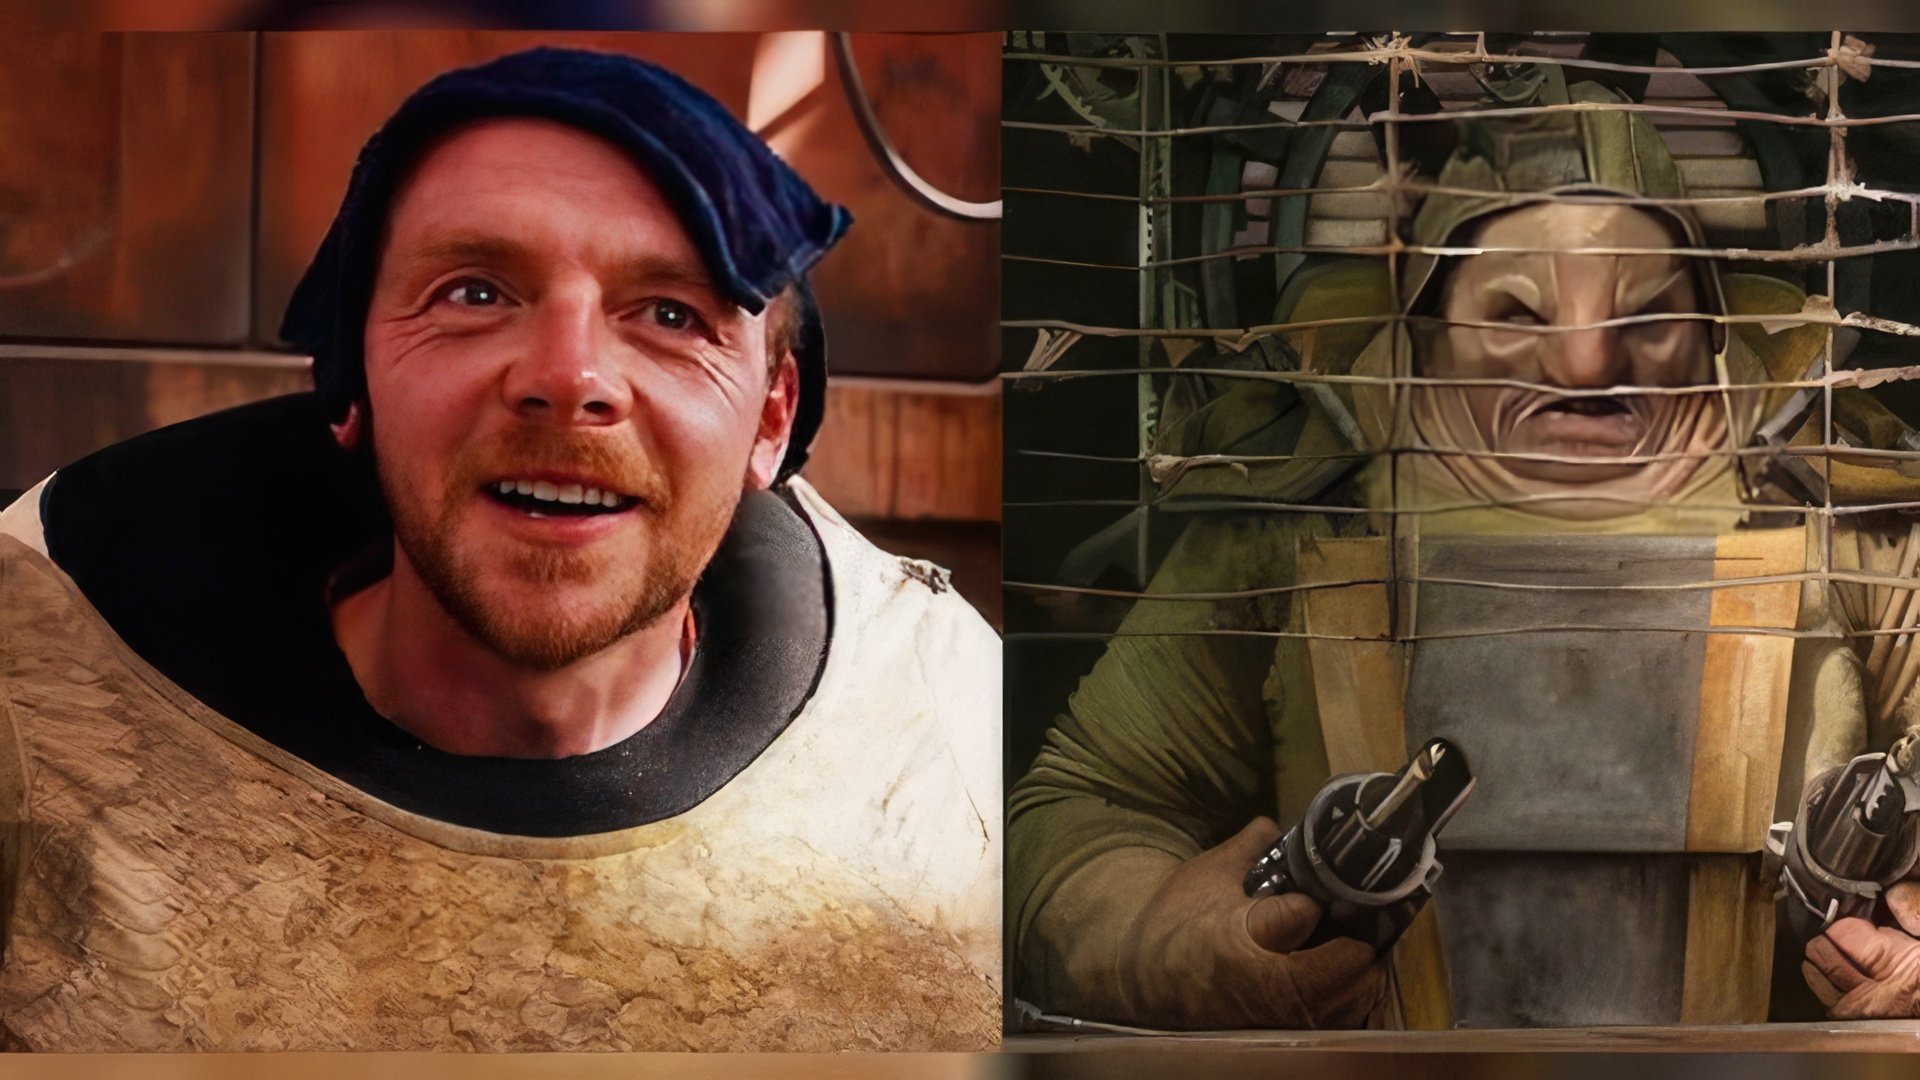 Simon Pegg in 'Star Wars' is not so easy to recognize